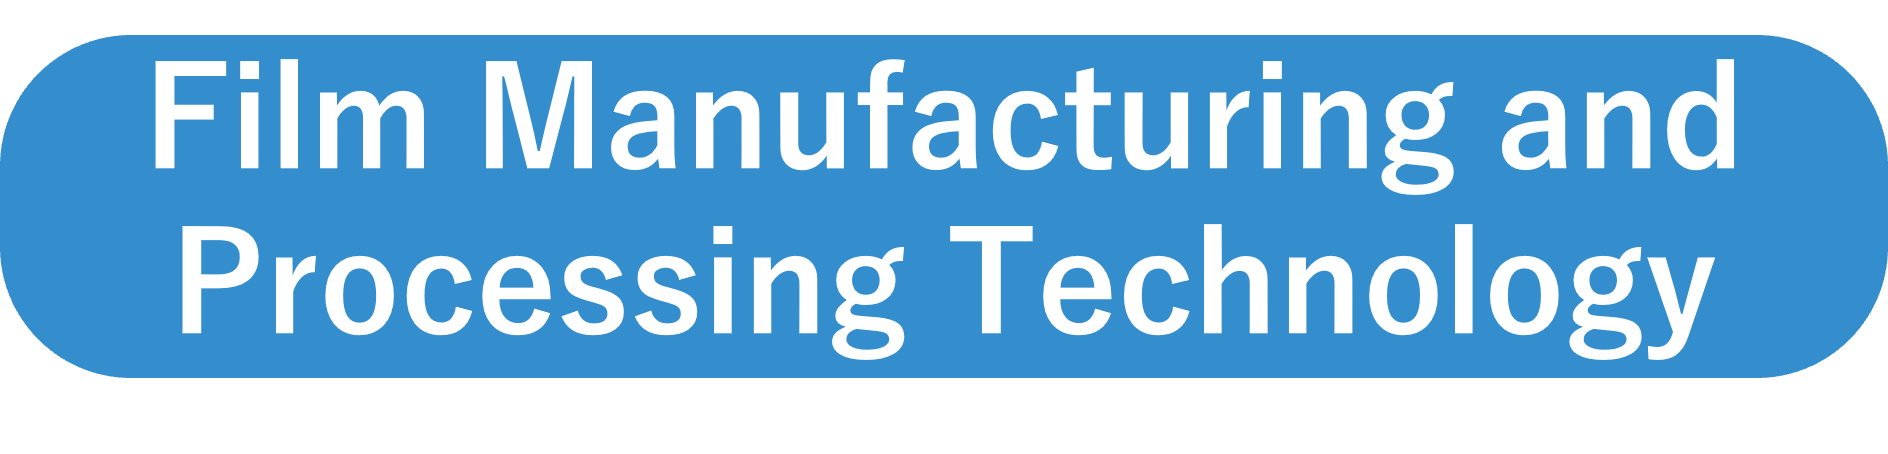 Film manufacturing and processing technology